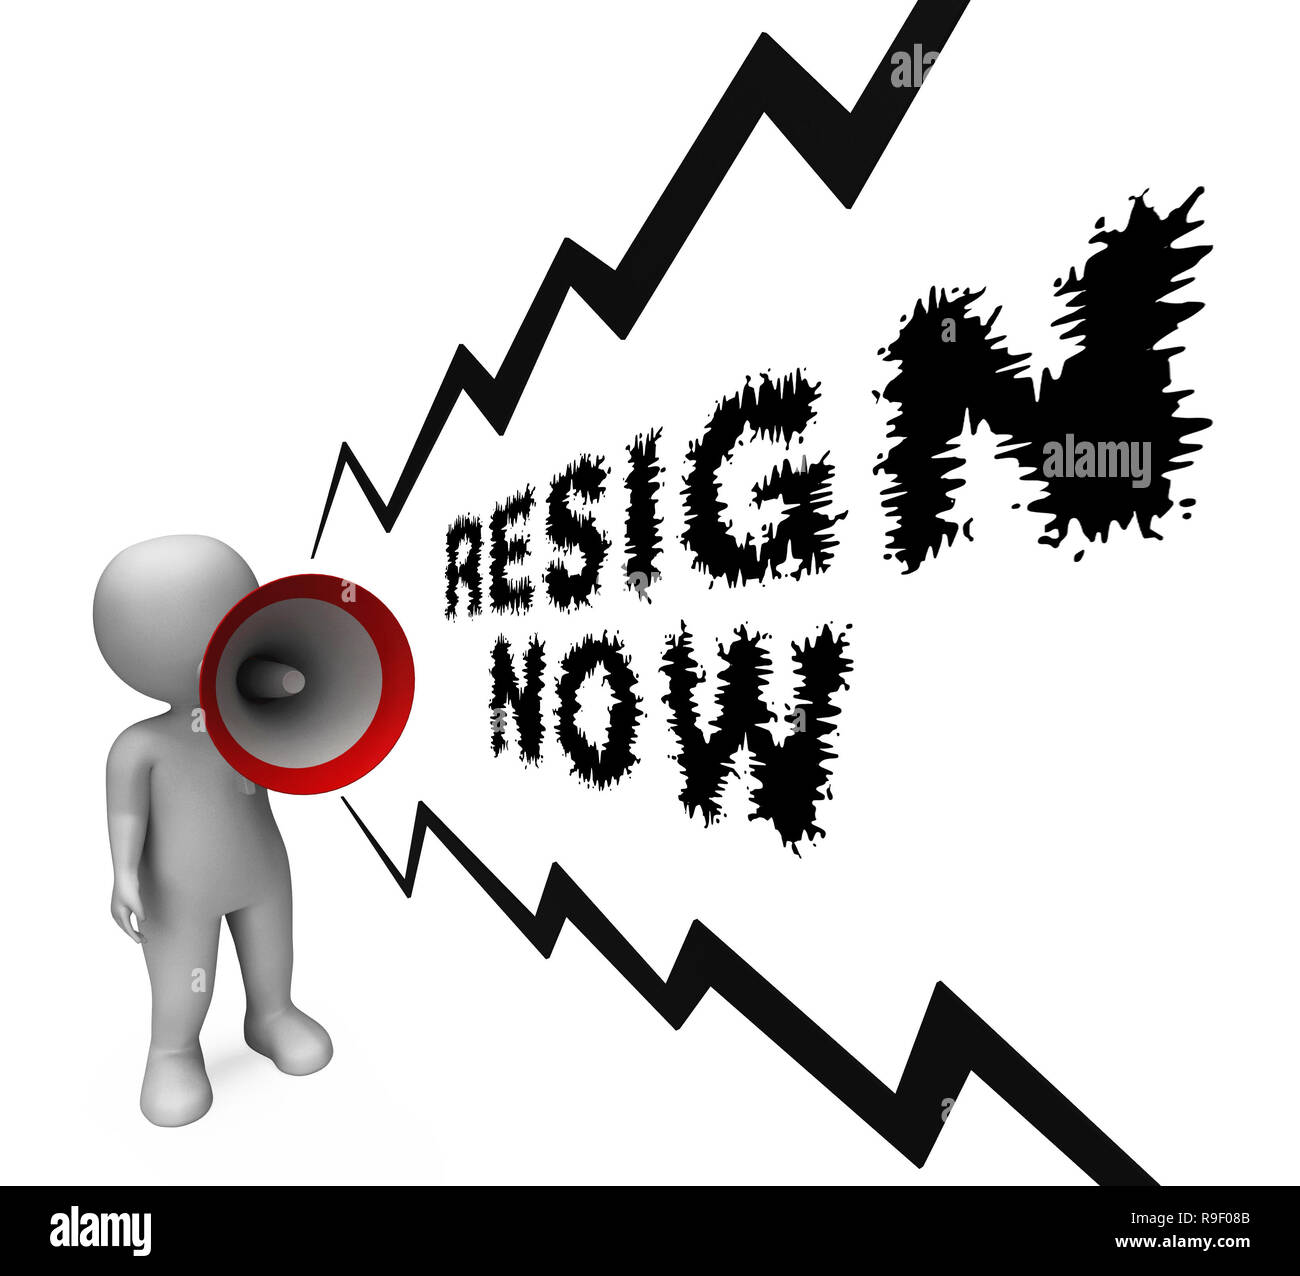 Resign Angry Man Means Quit Or Dismissal From Job Government Or President.  Anti Corruption Outcry Dismissal Protest Stock Photo - Alamy